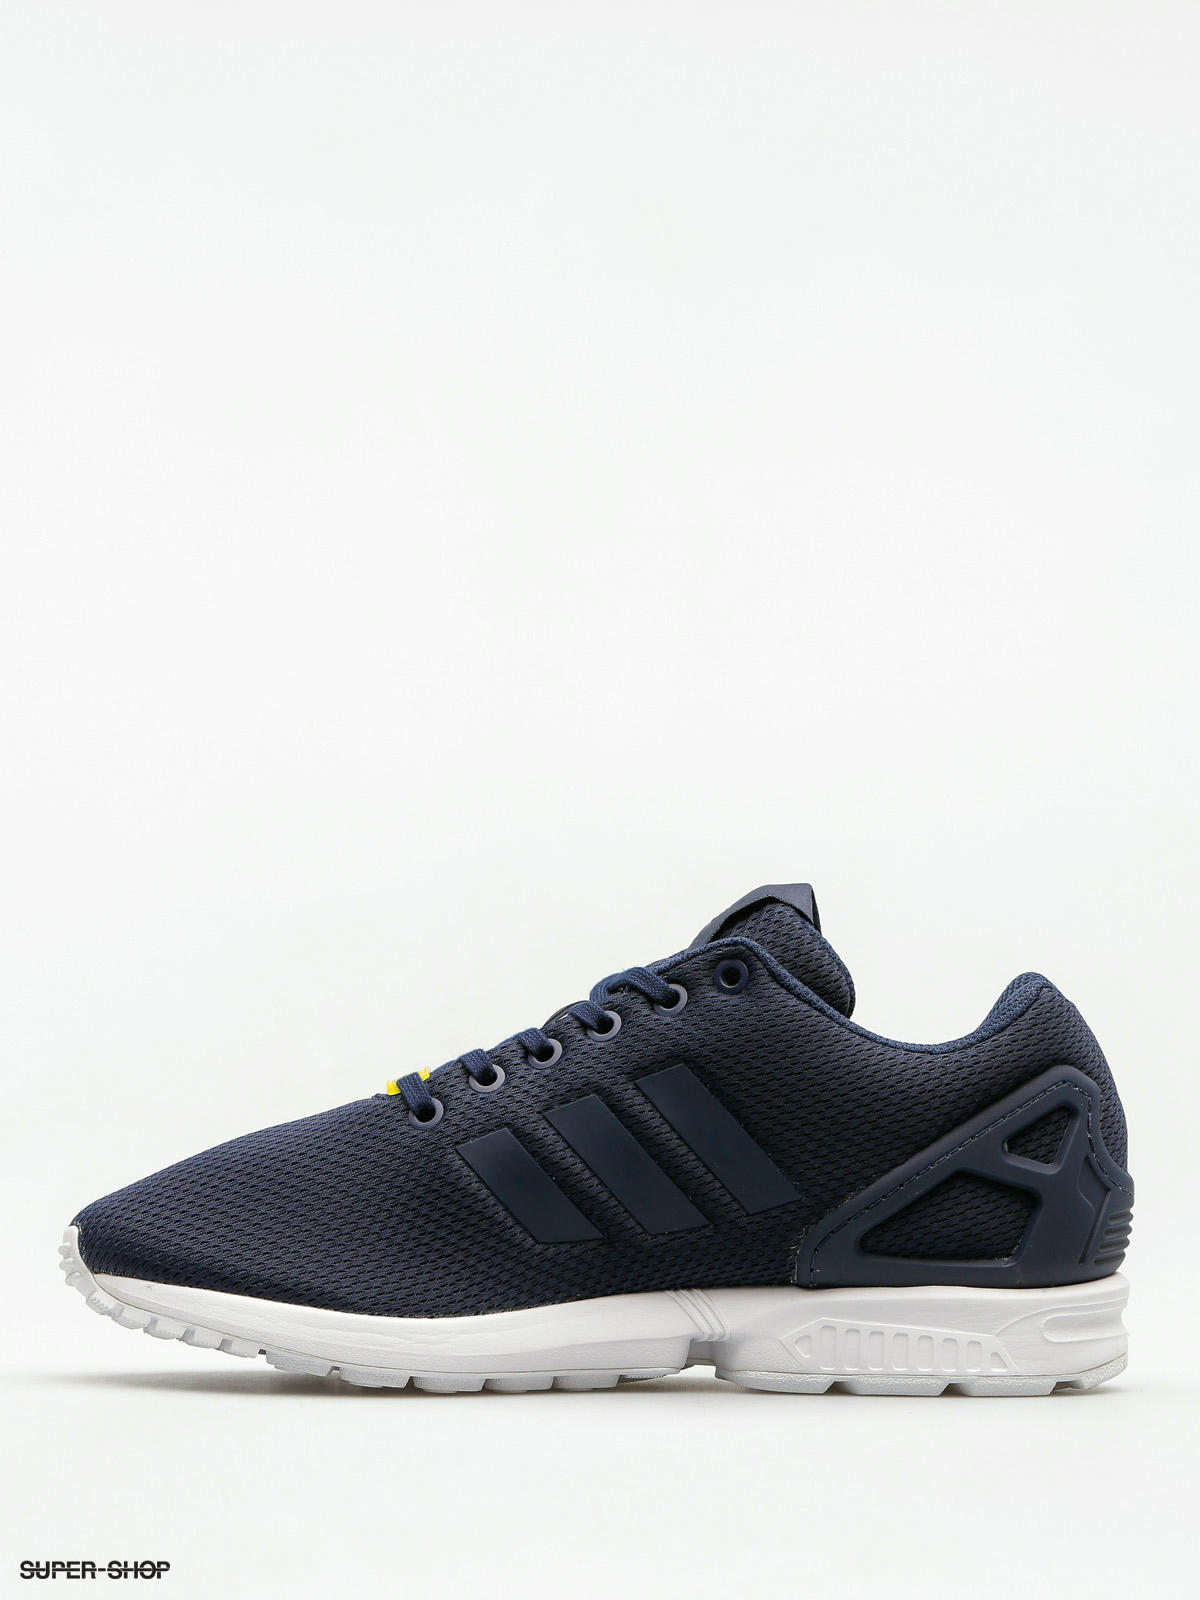 new adidas shoes zx flux